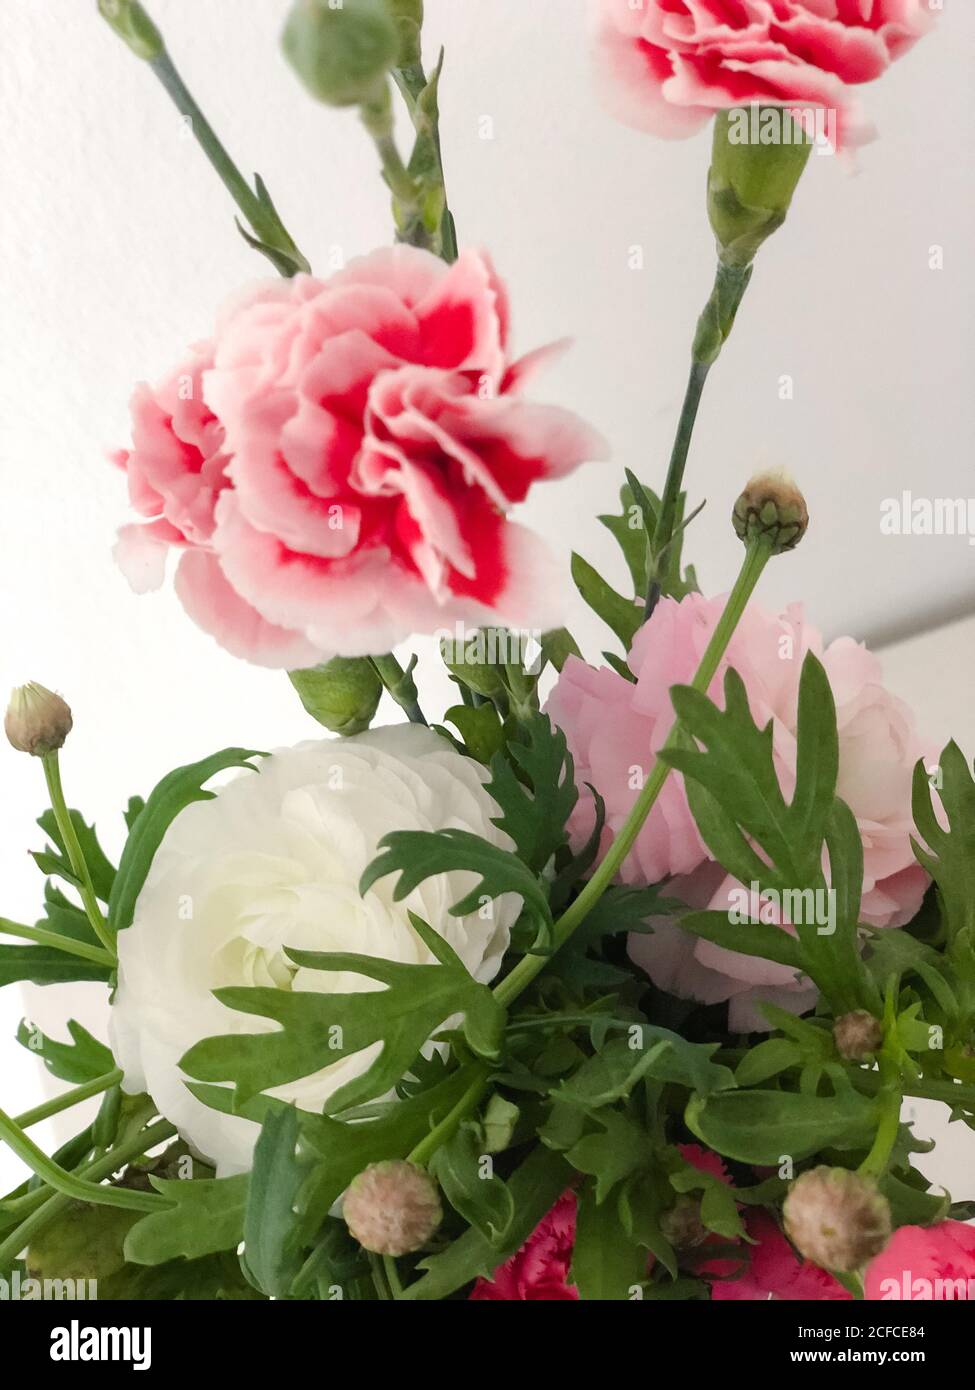 Spring bouquet with carnations and ranunculus, colorful bouquet in a white vase, Instagram style, Stock Photo